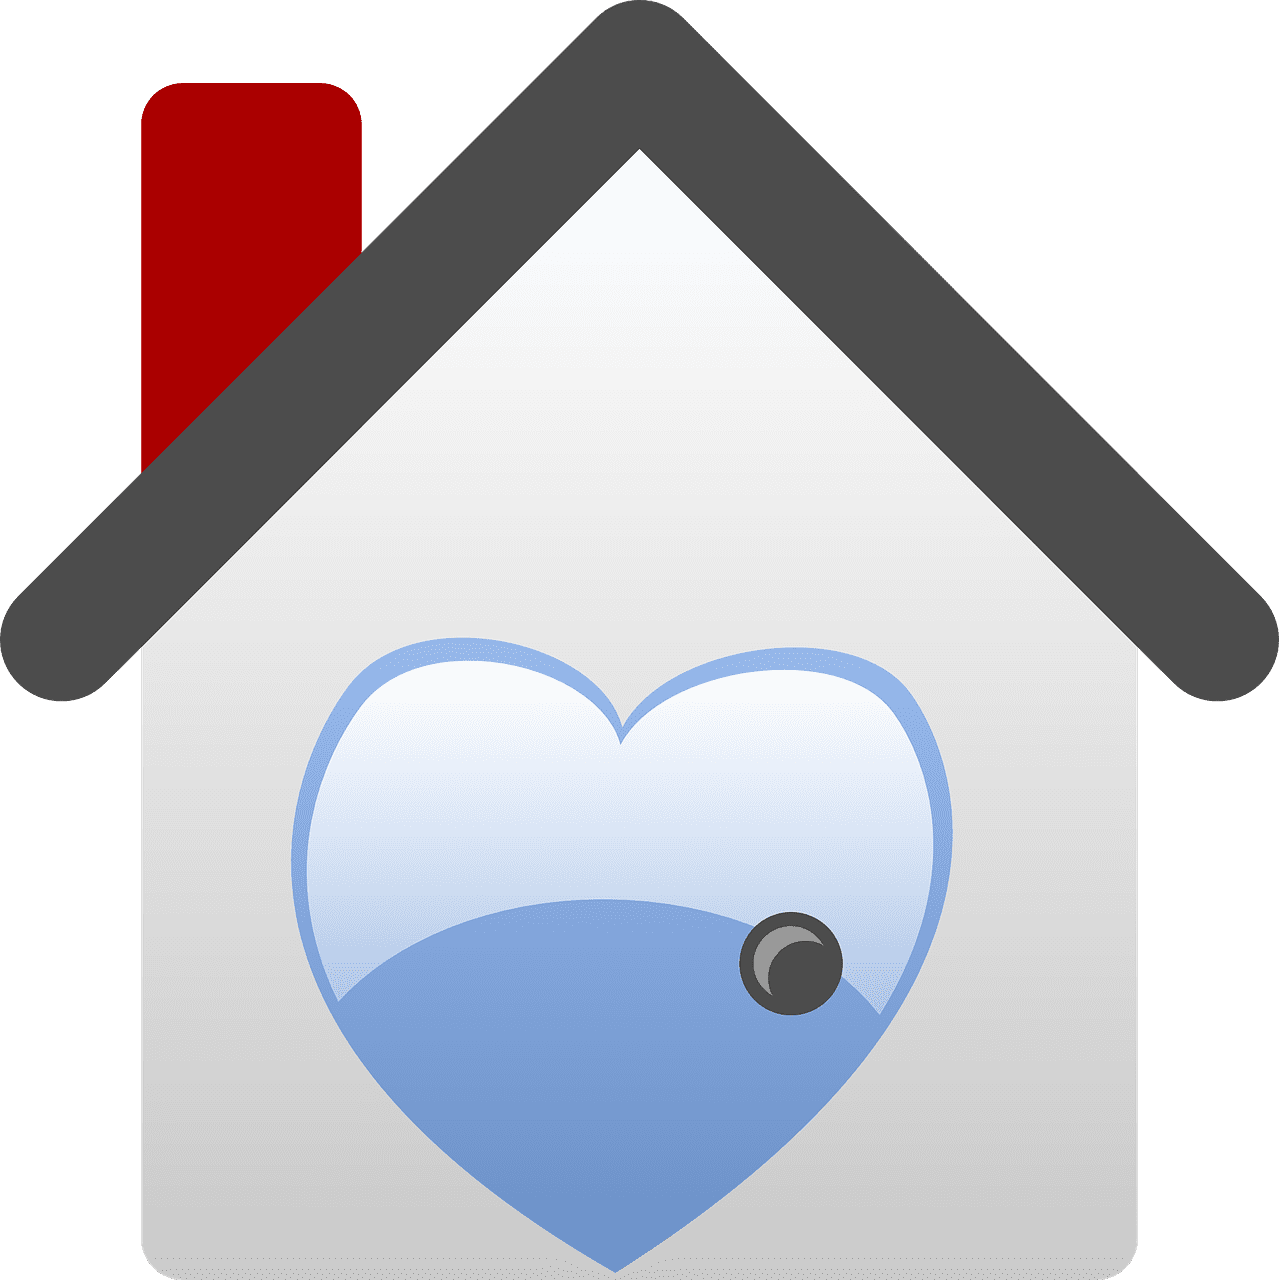 An illustration of a house with a blue heart in it